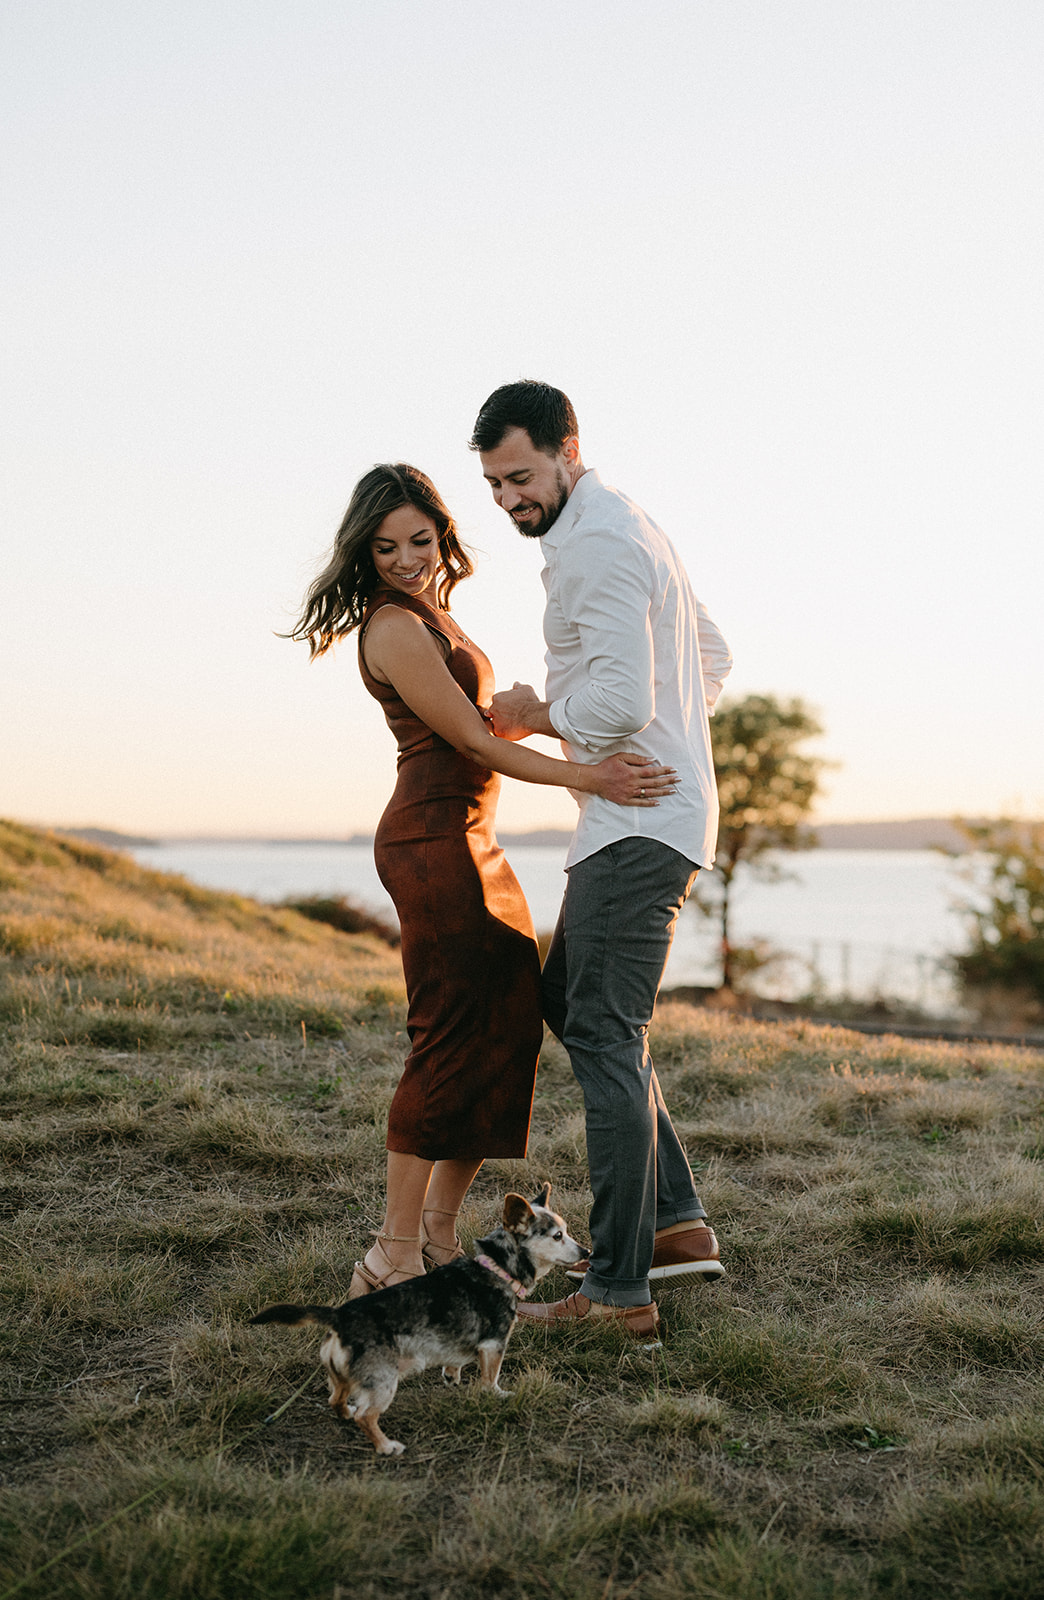 A couple dancing on a grassy hill with their dog.